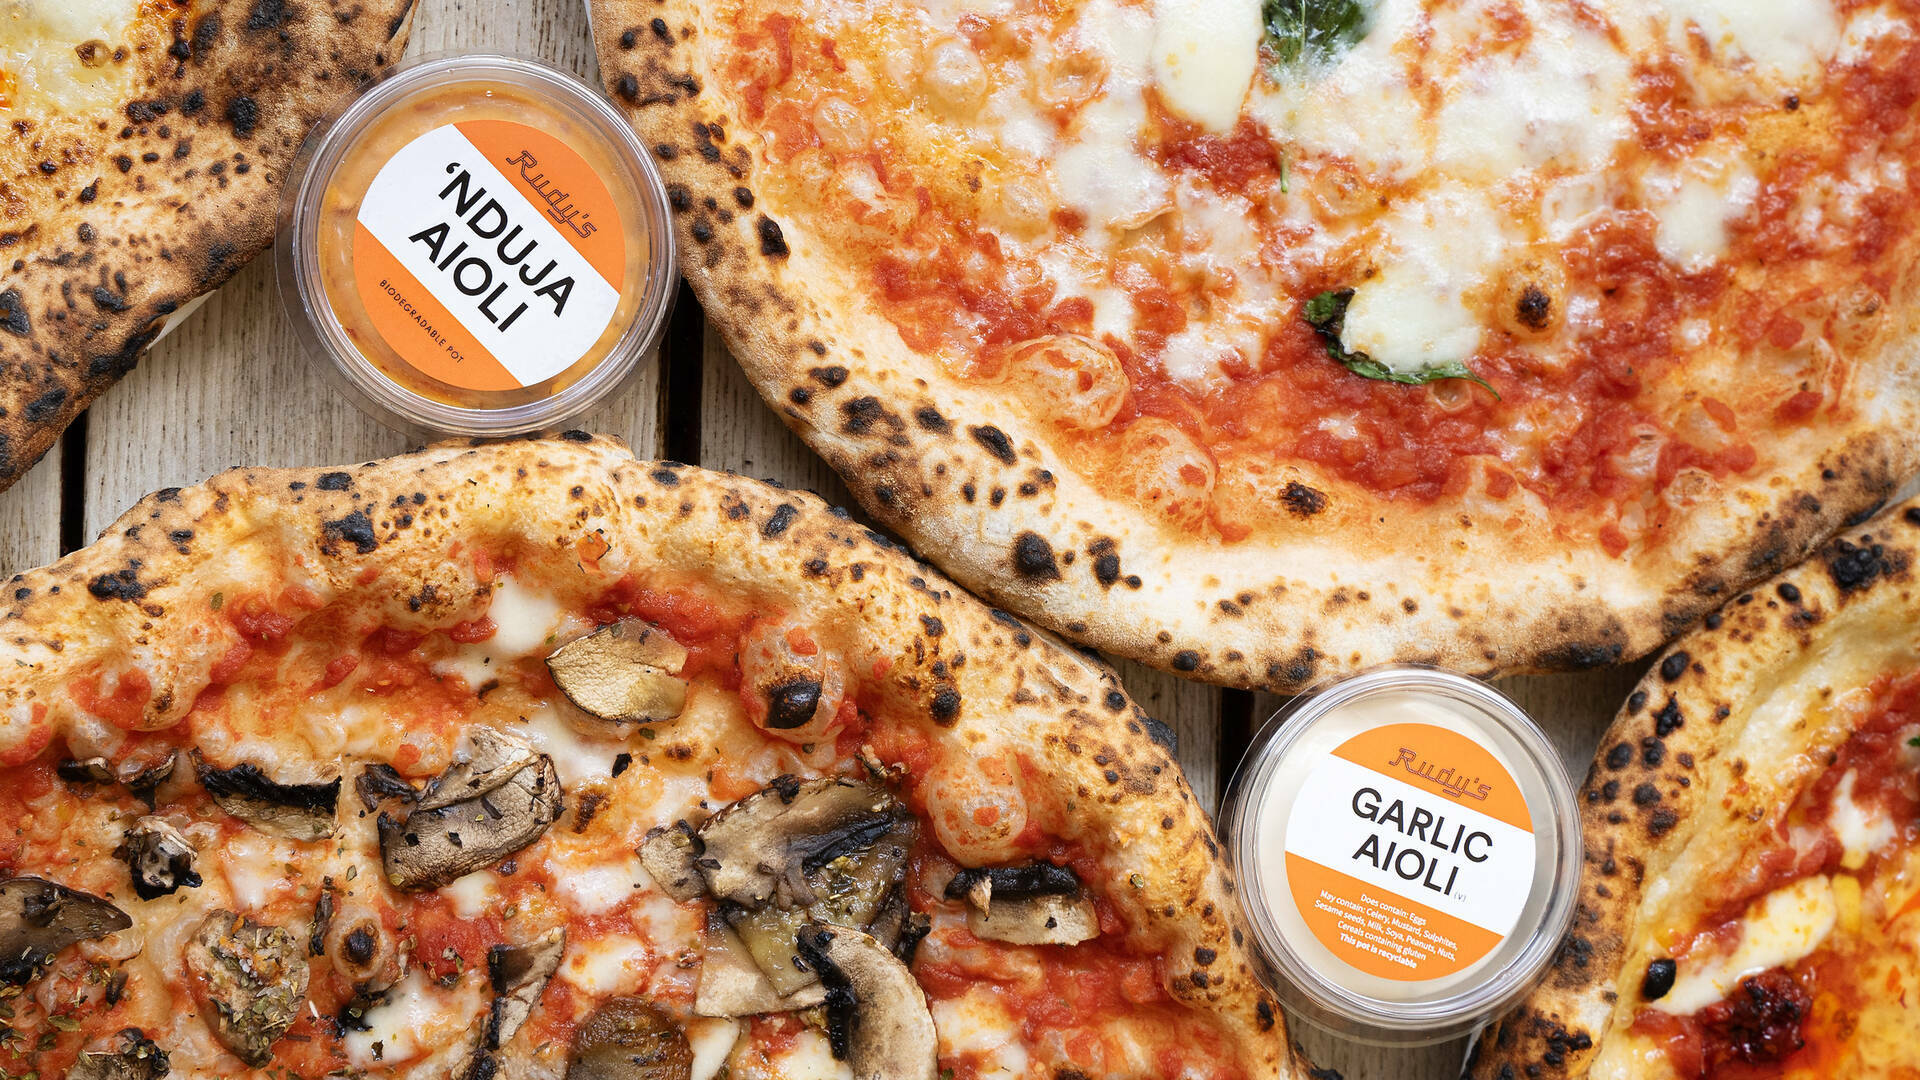 this-london-pizzeria-is-giving-away-5,000-free-pizzas